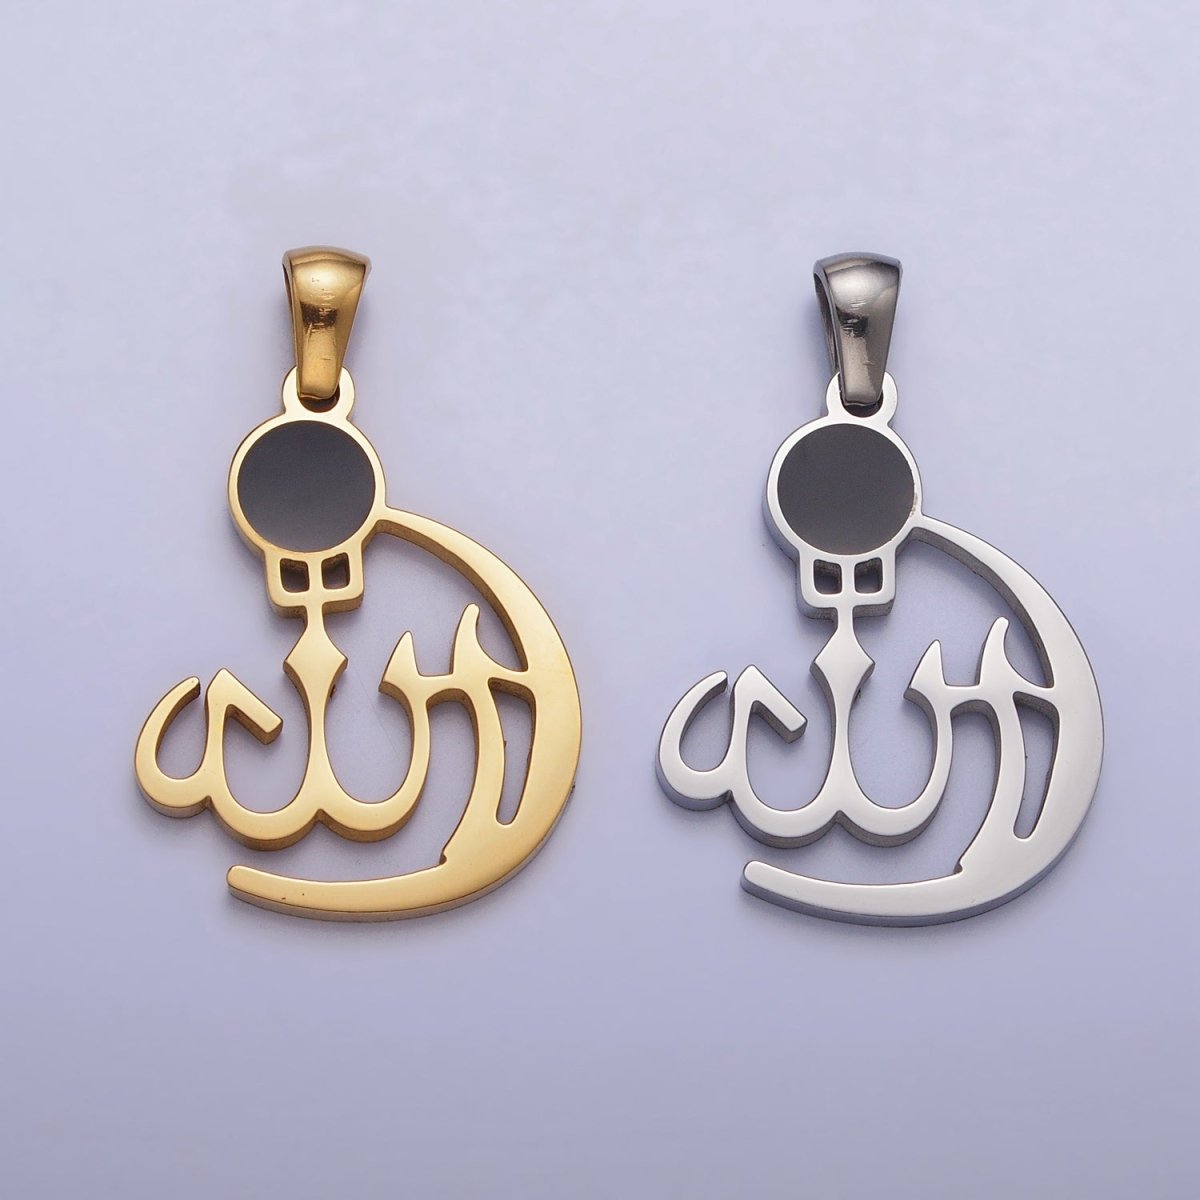 Stainless Steel "Allah" "God" Calligraphy Arabic Muslim Religious Pendant in Gold & Silver J-473 J-486 - DLUXCA